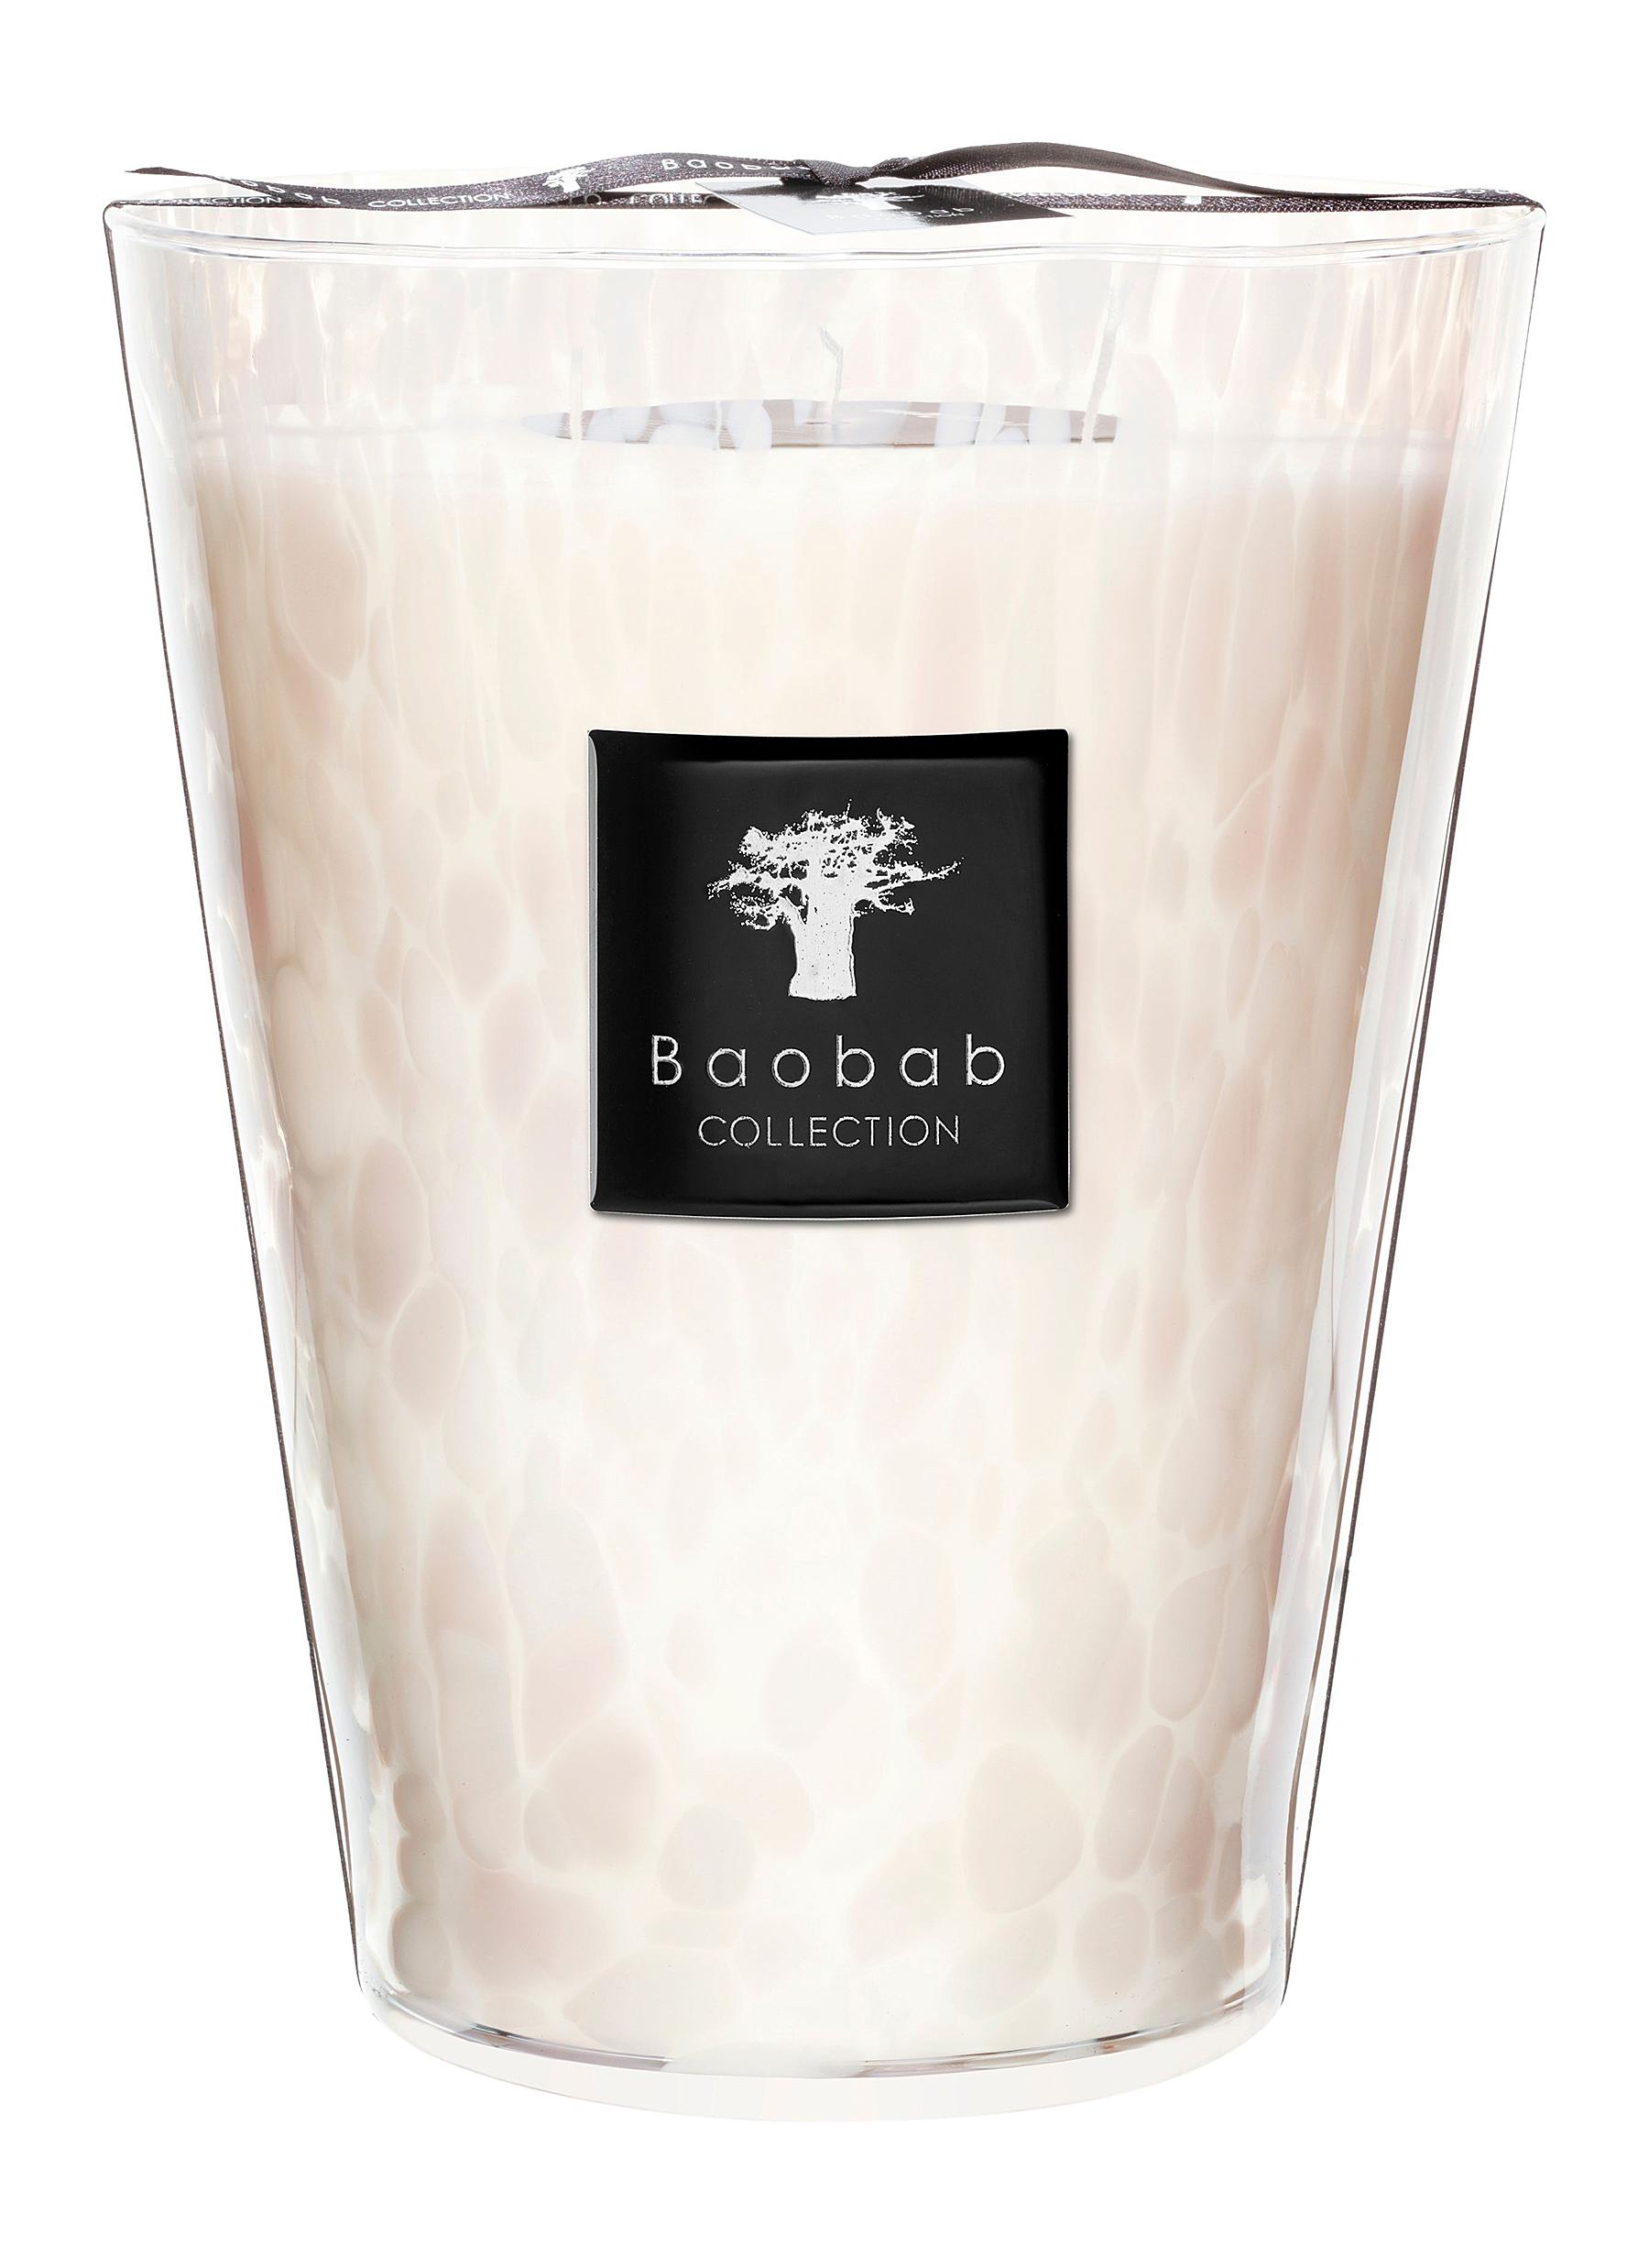 BAOBAB COLLECTION, Pearls White MAX24 Scented Candle 3kg